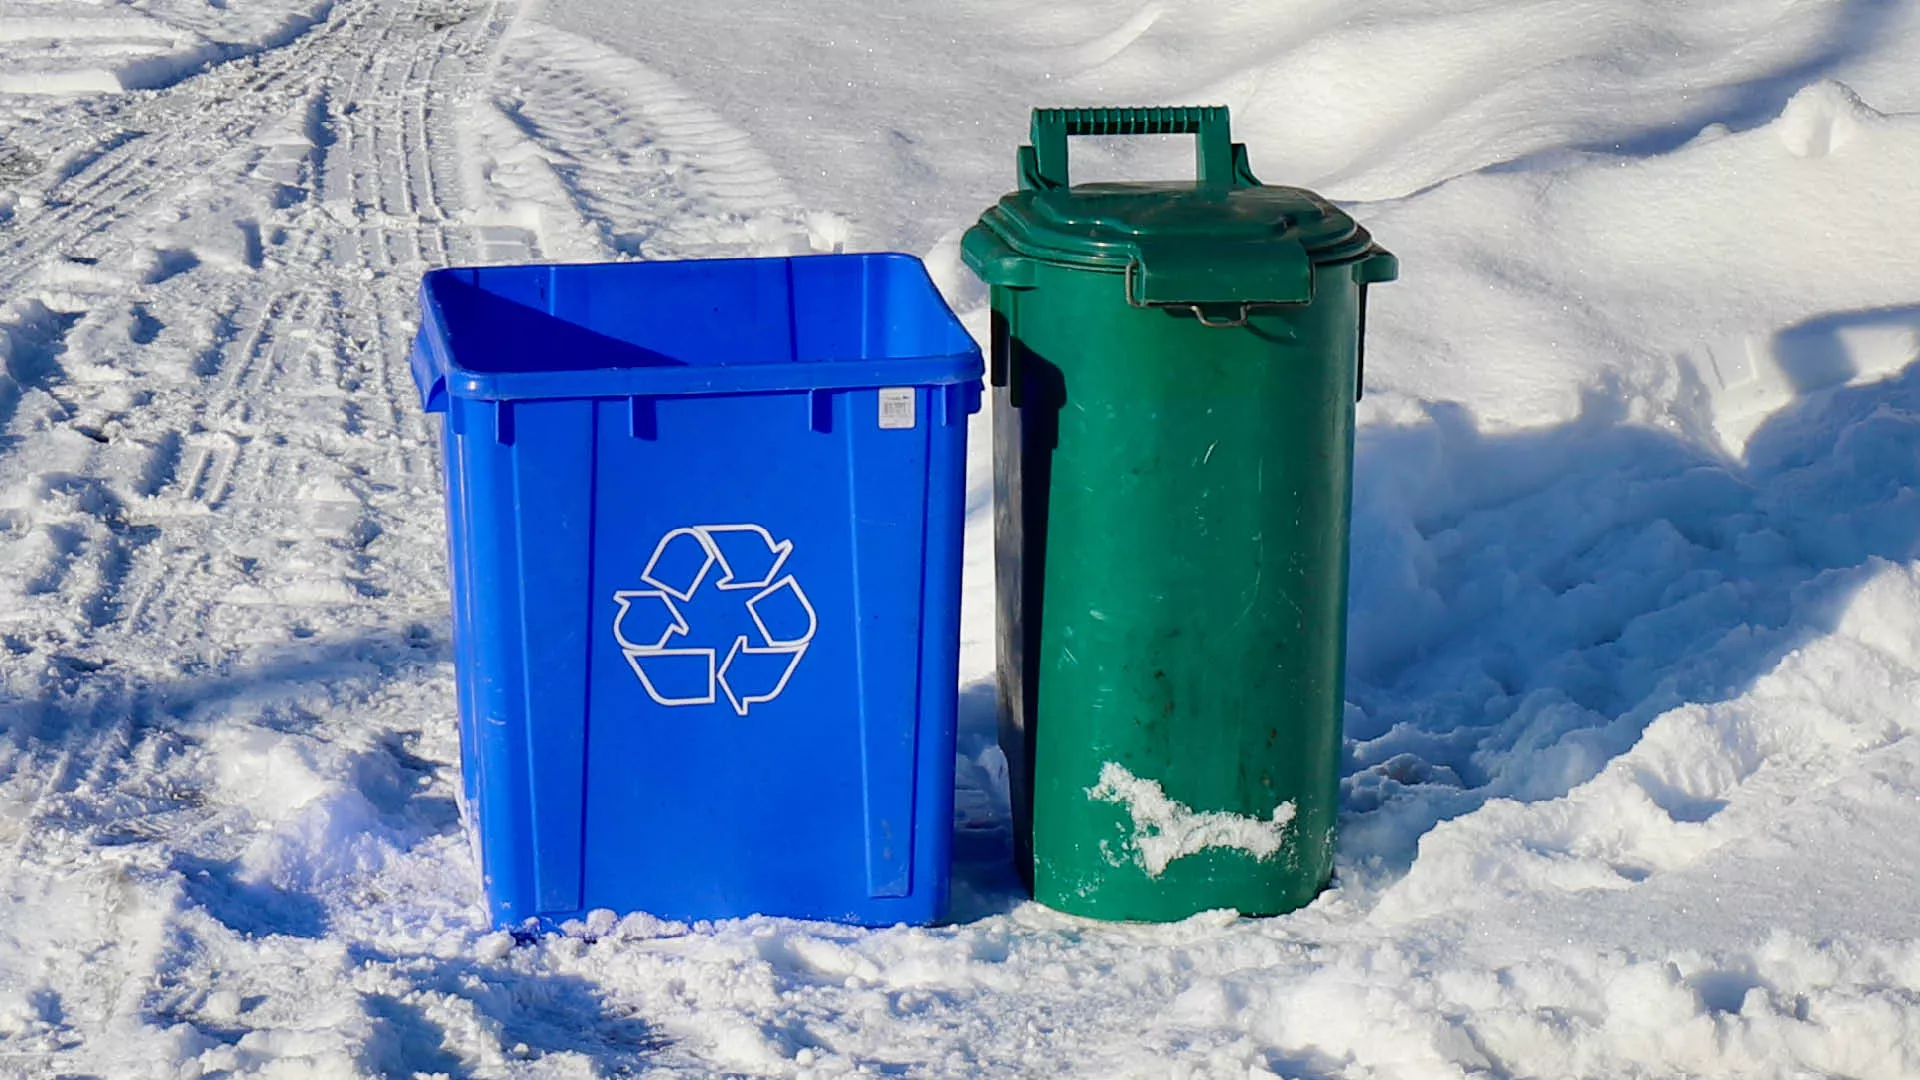 blue box and green bin in snow